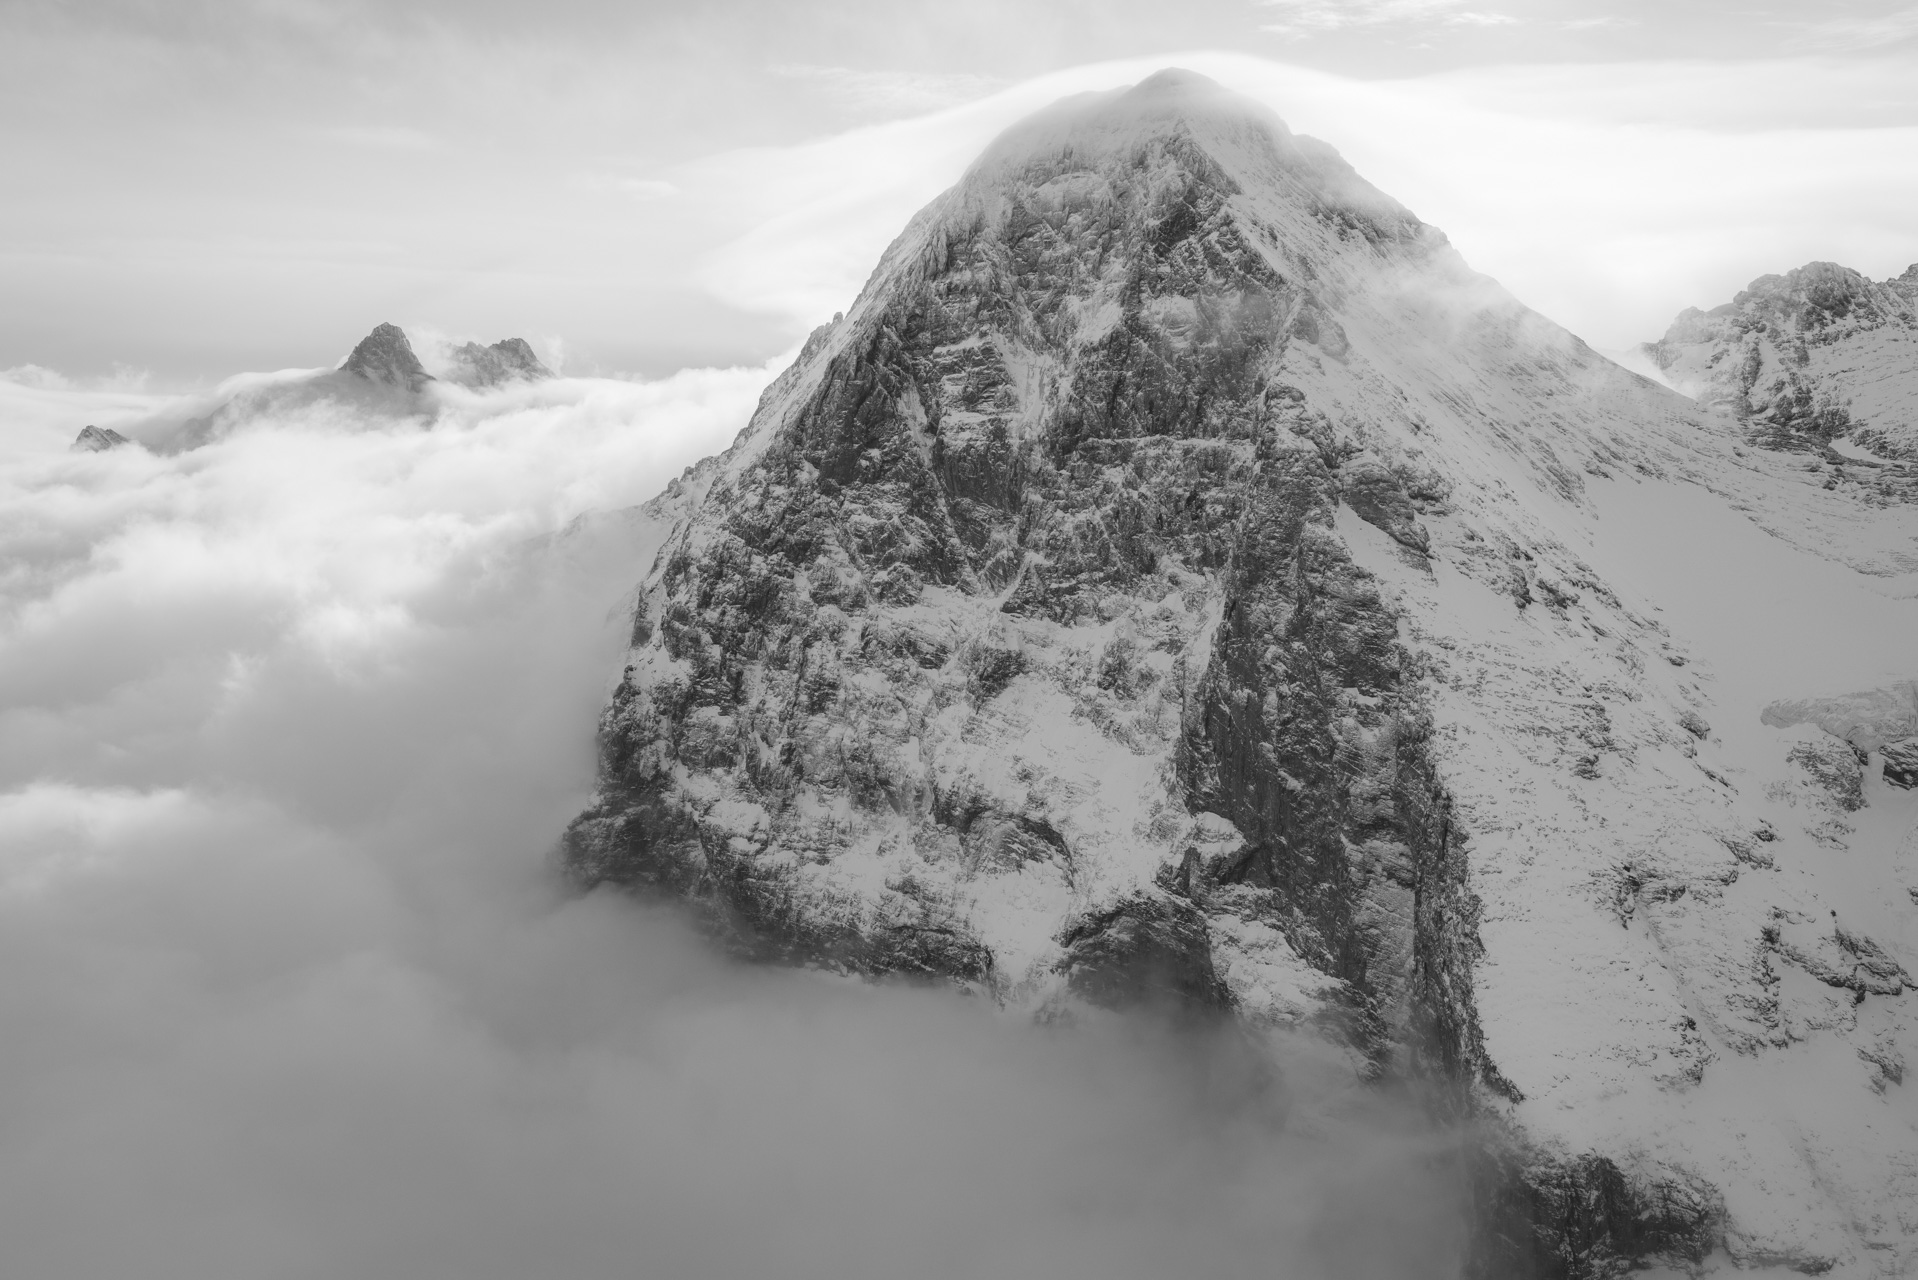 The Eiger Grindelwald  - Black and white snowy mountain picture - Mountain picture in the mist